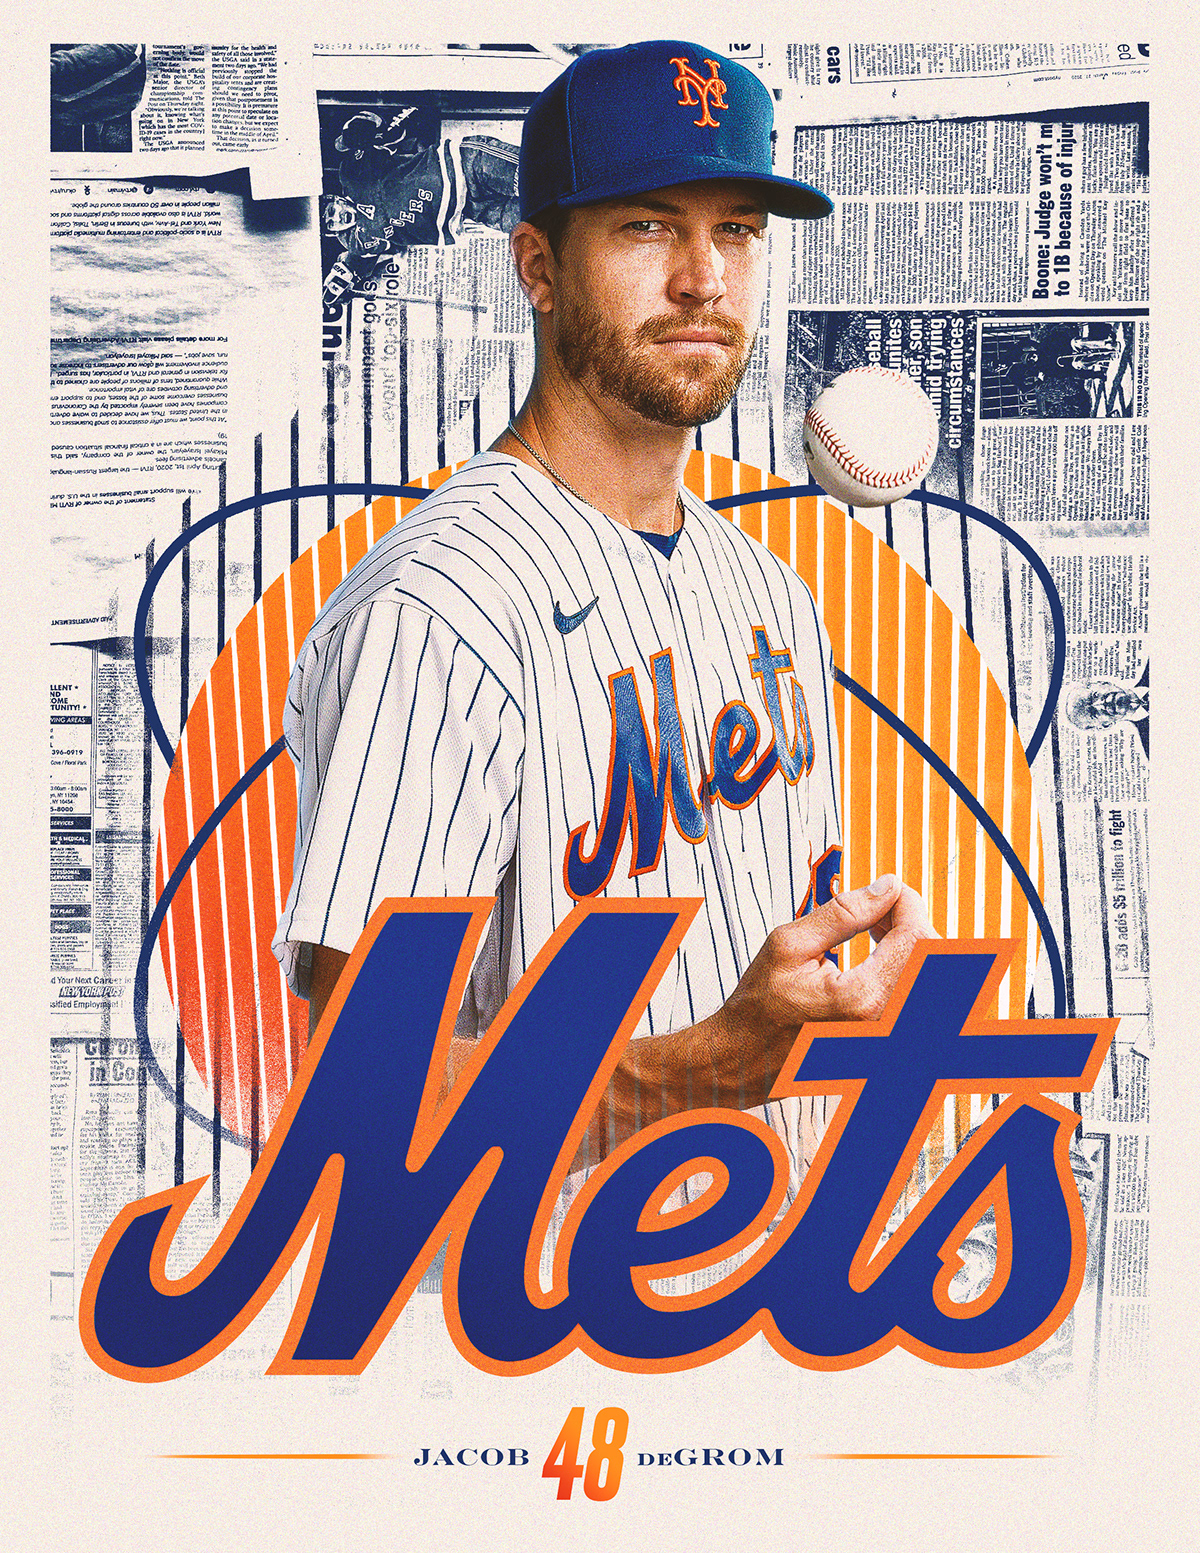 baseball Mets mlb New York New York Mets NY poster Poster Design posters Queens